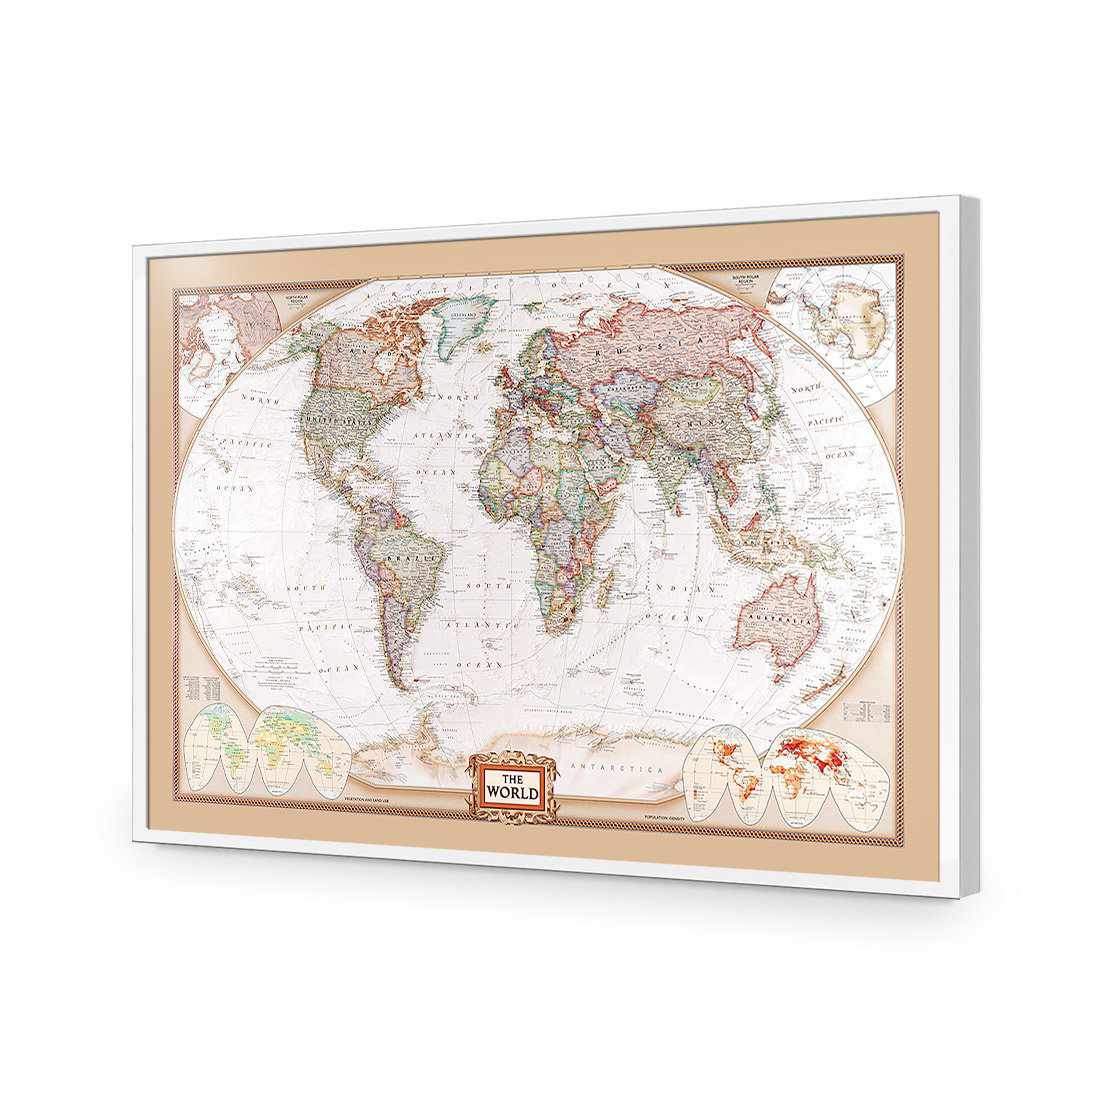 The World Map-Acrylic-Wall Art Design-Without Border-Acrylic - White Frame-45x30cm-Wall Art Designs